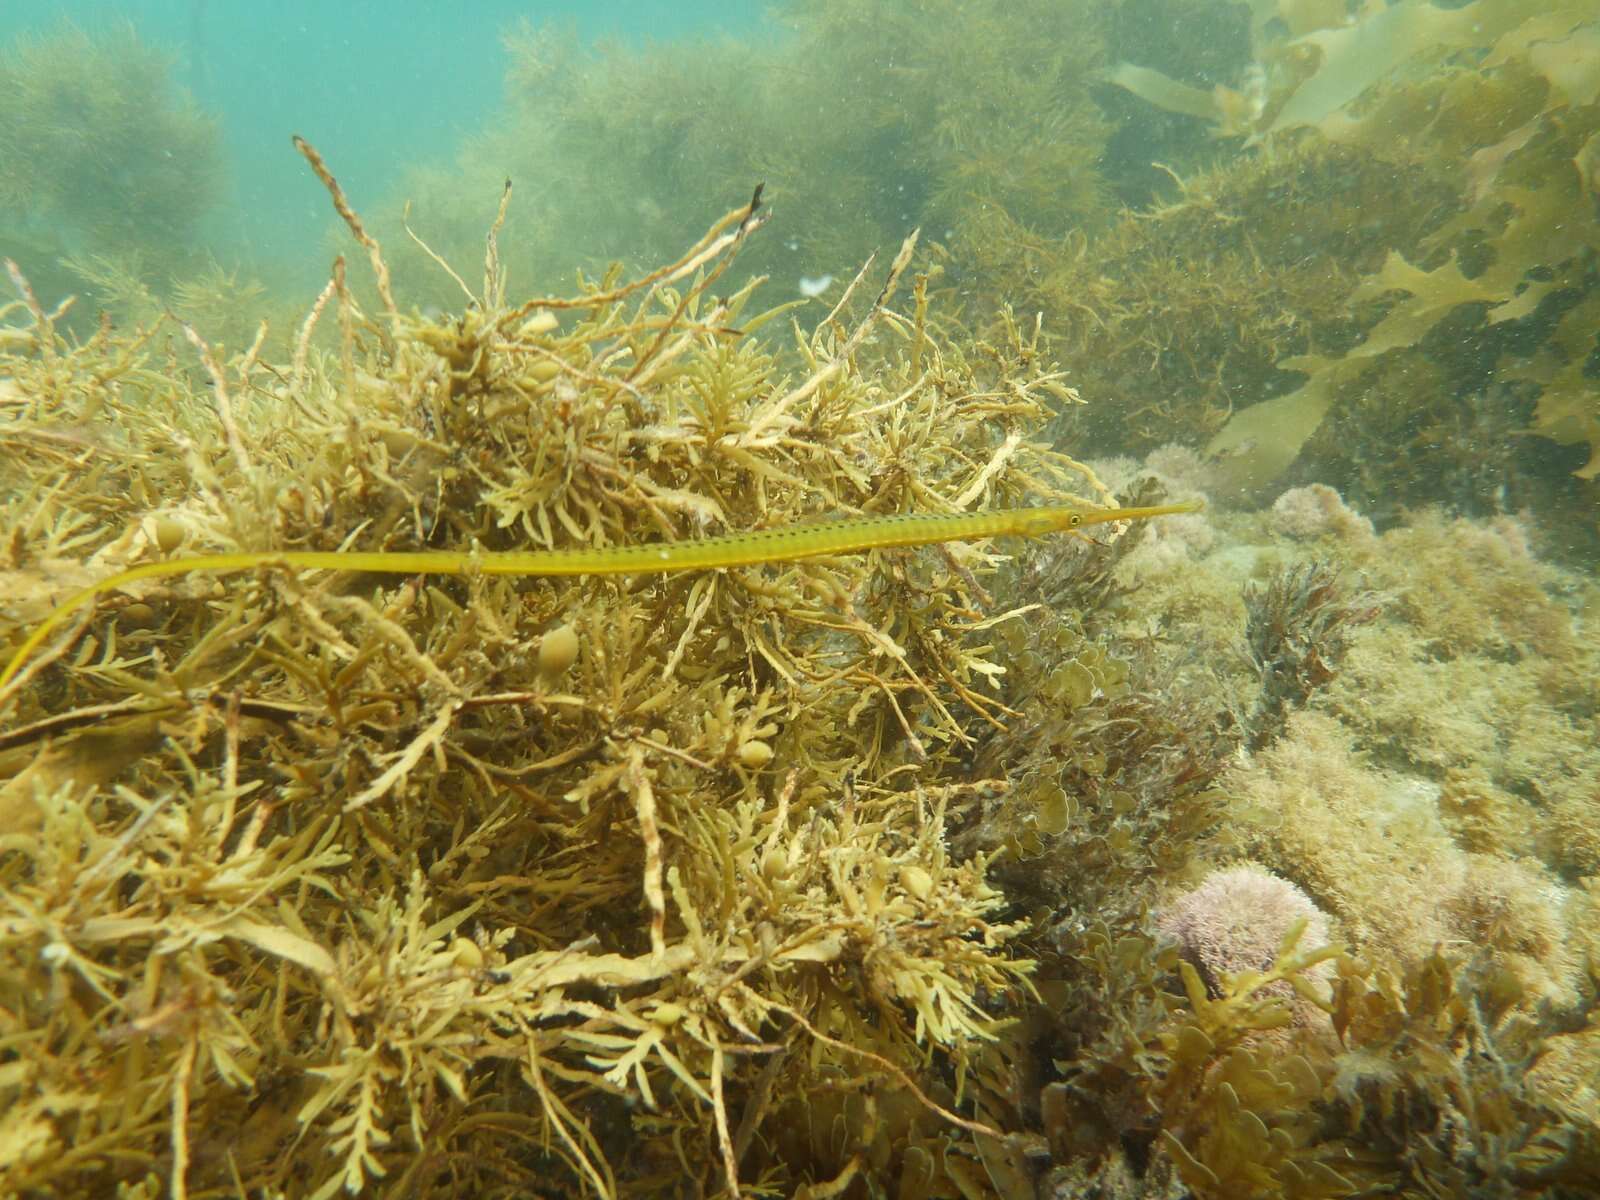 Image of Long-snouted pipefish